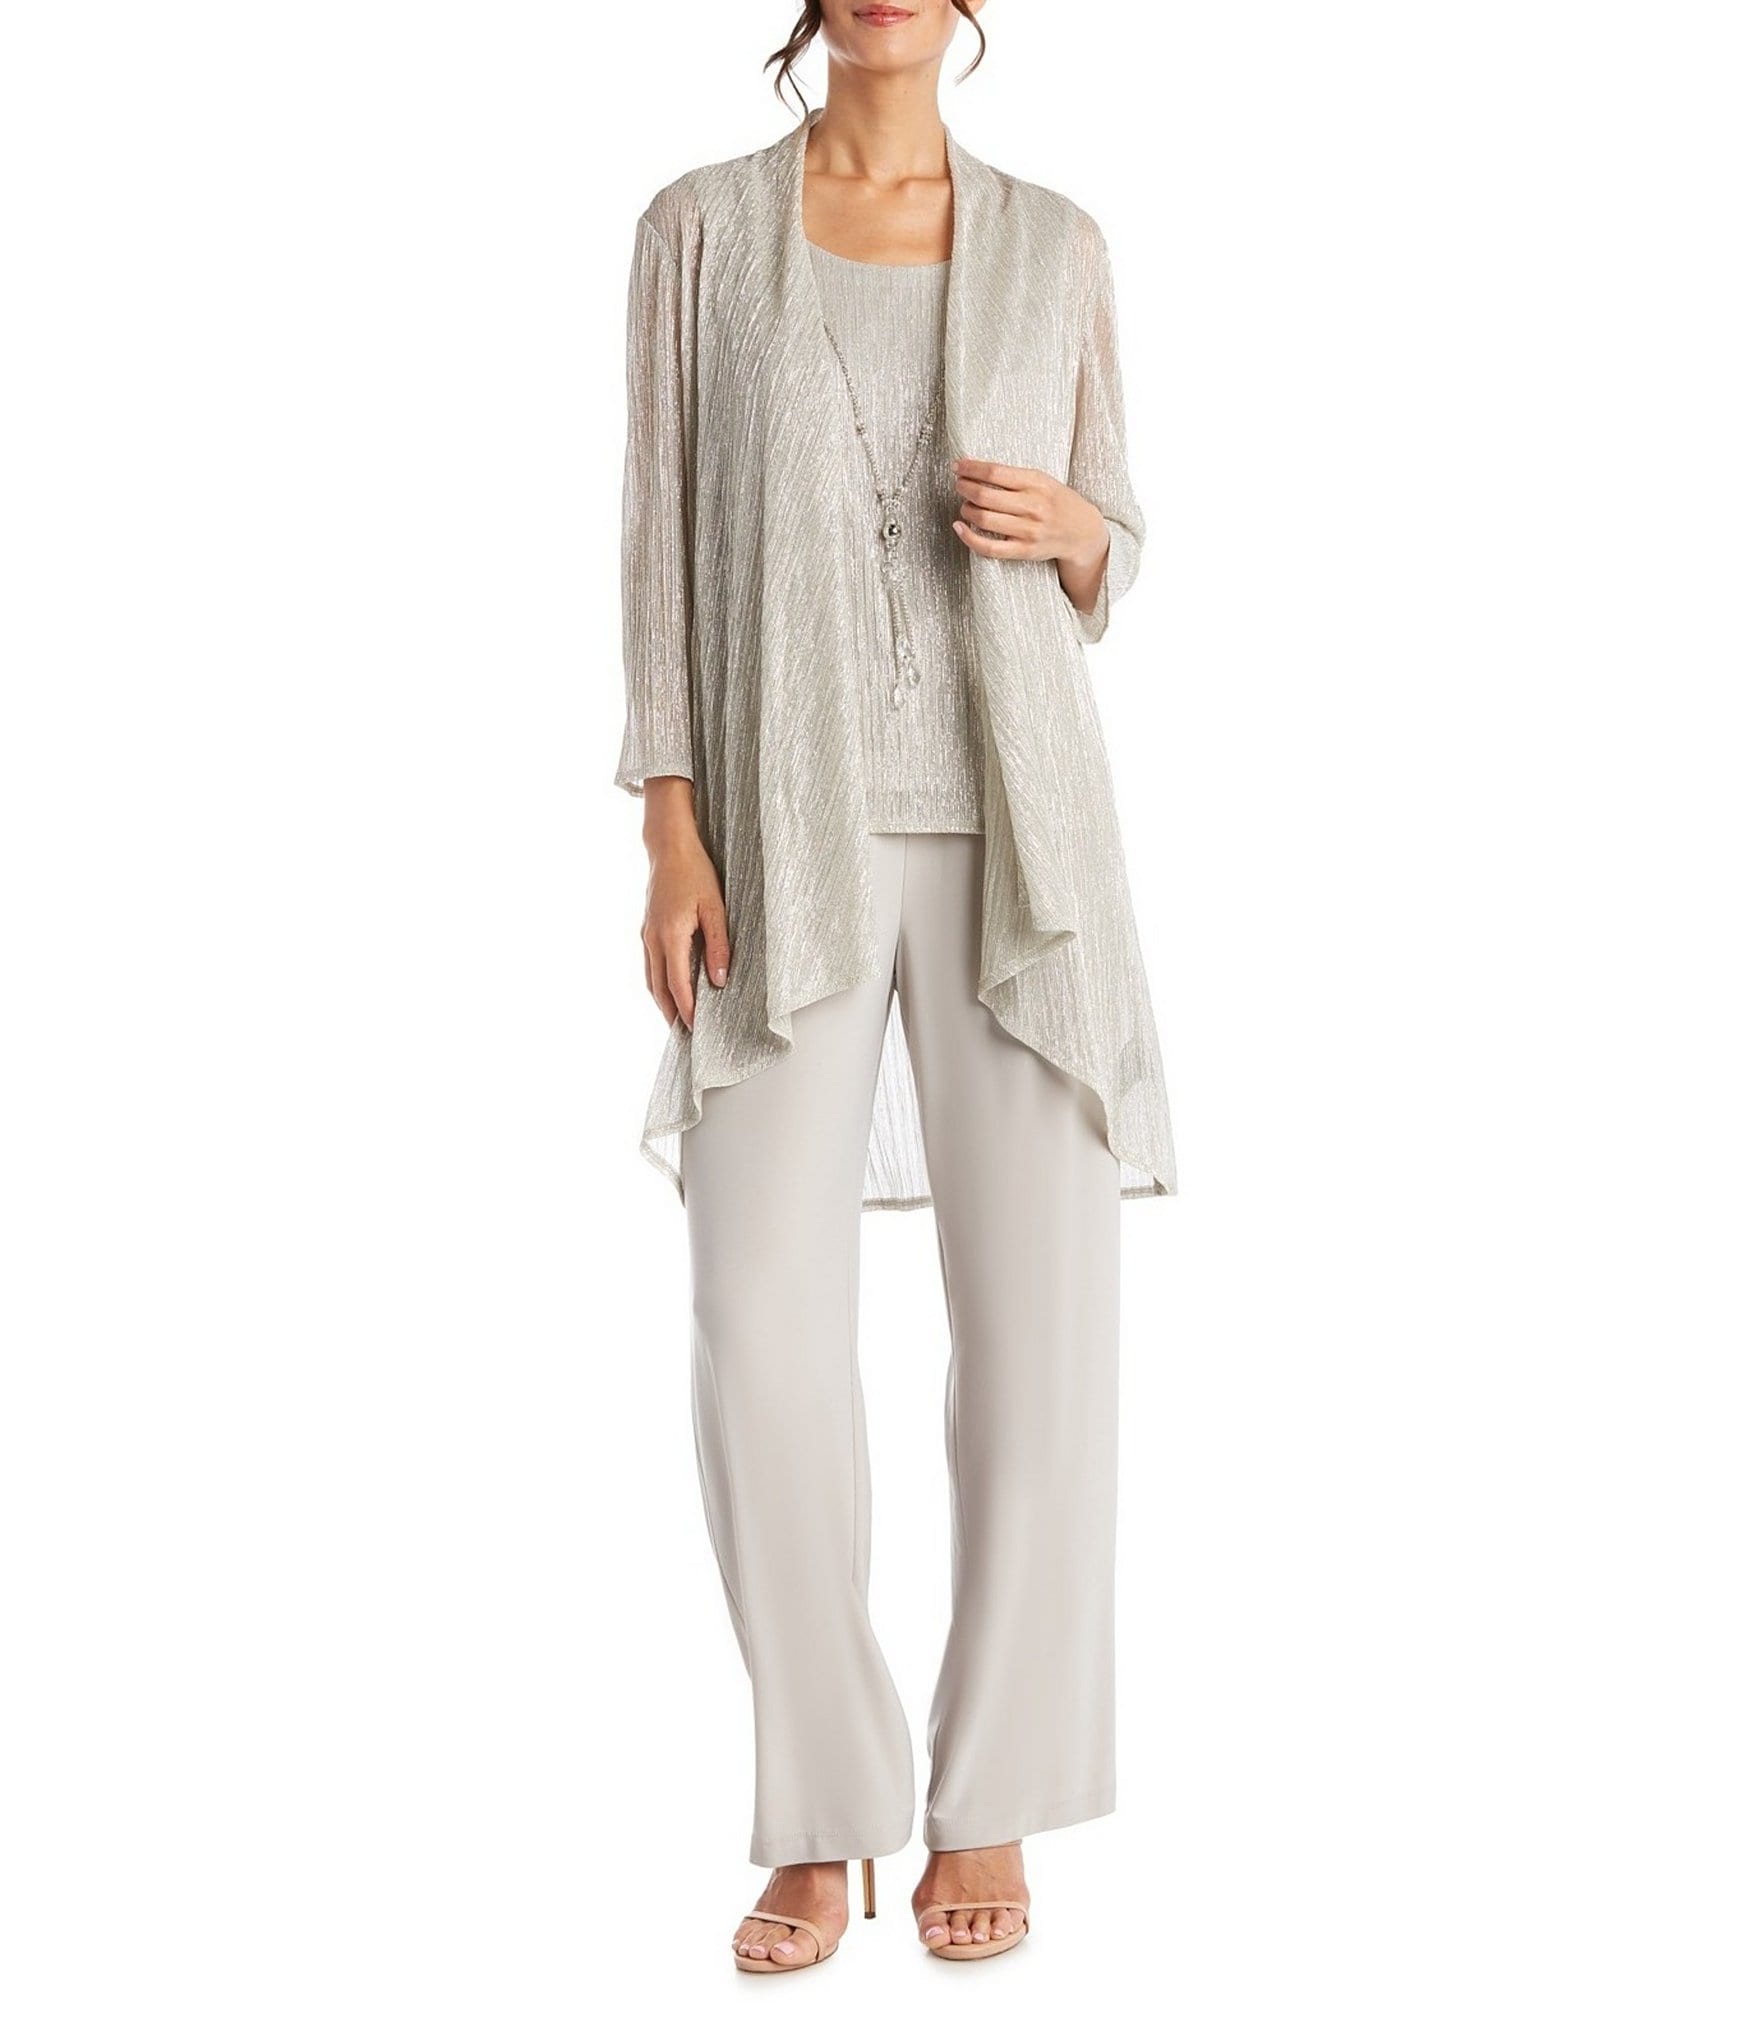 Dillard’s Wedding pant suits for grandmothers | Dresses Images 2022